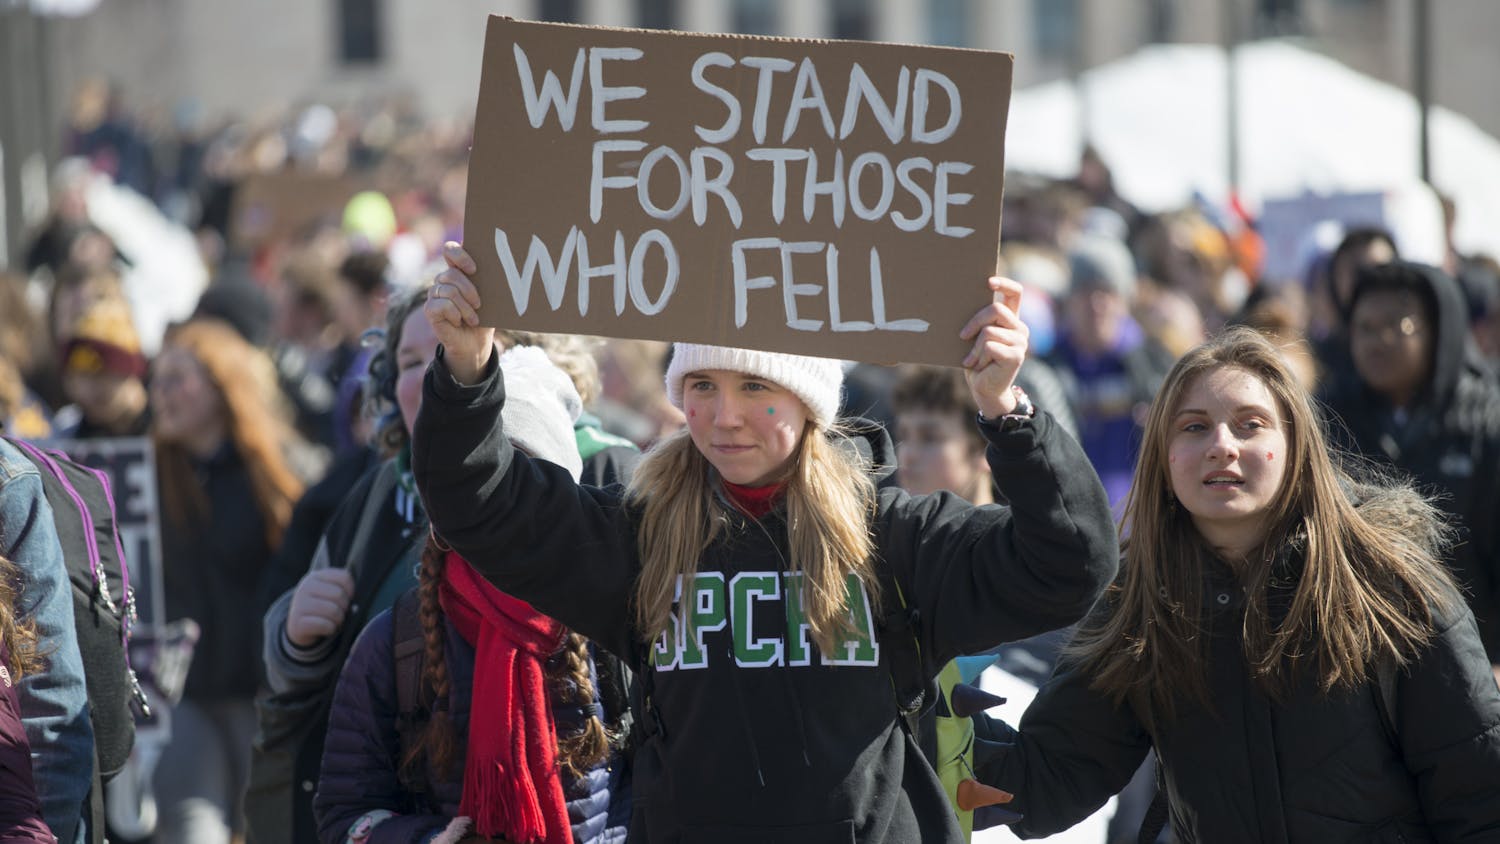 School shootings have doubled since 2018, with 68 being reported this year, according to CNN. (Photo courtesy of Flickr/“March For Our Lives student protest for gun control” by Fibonacci Blue/March 7, 2018)